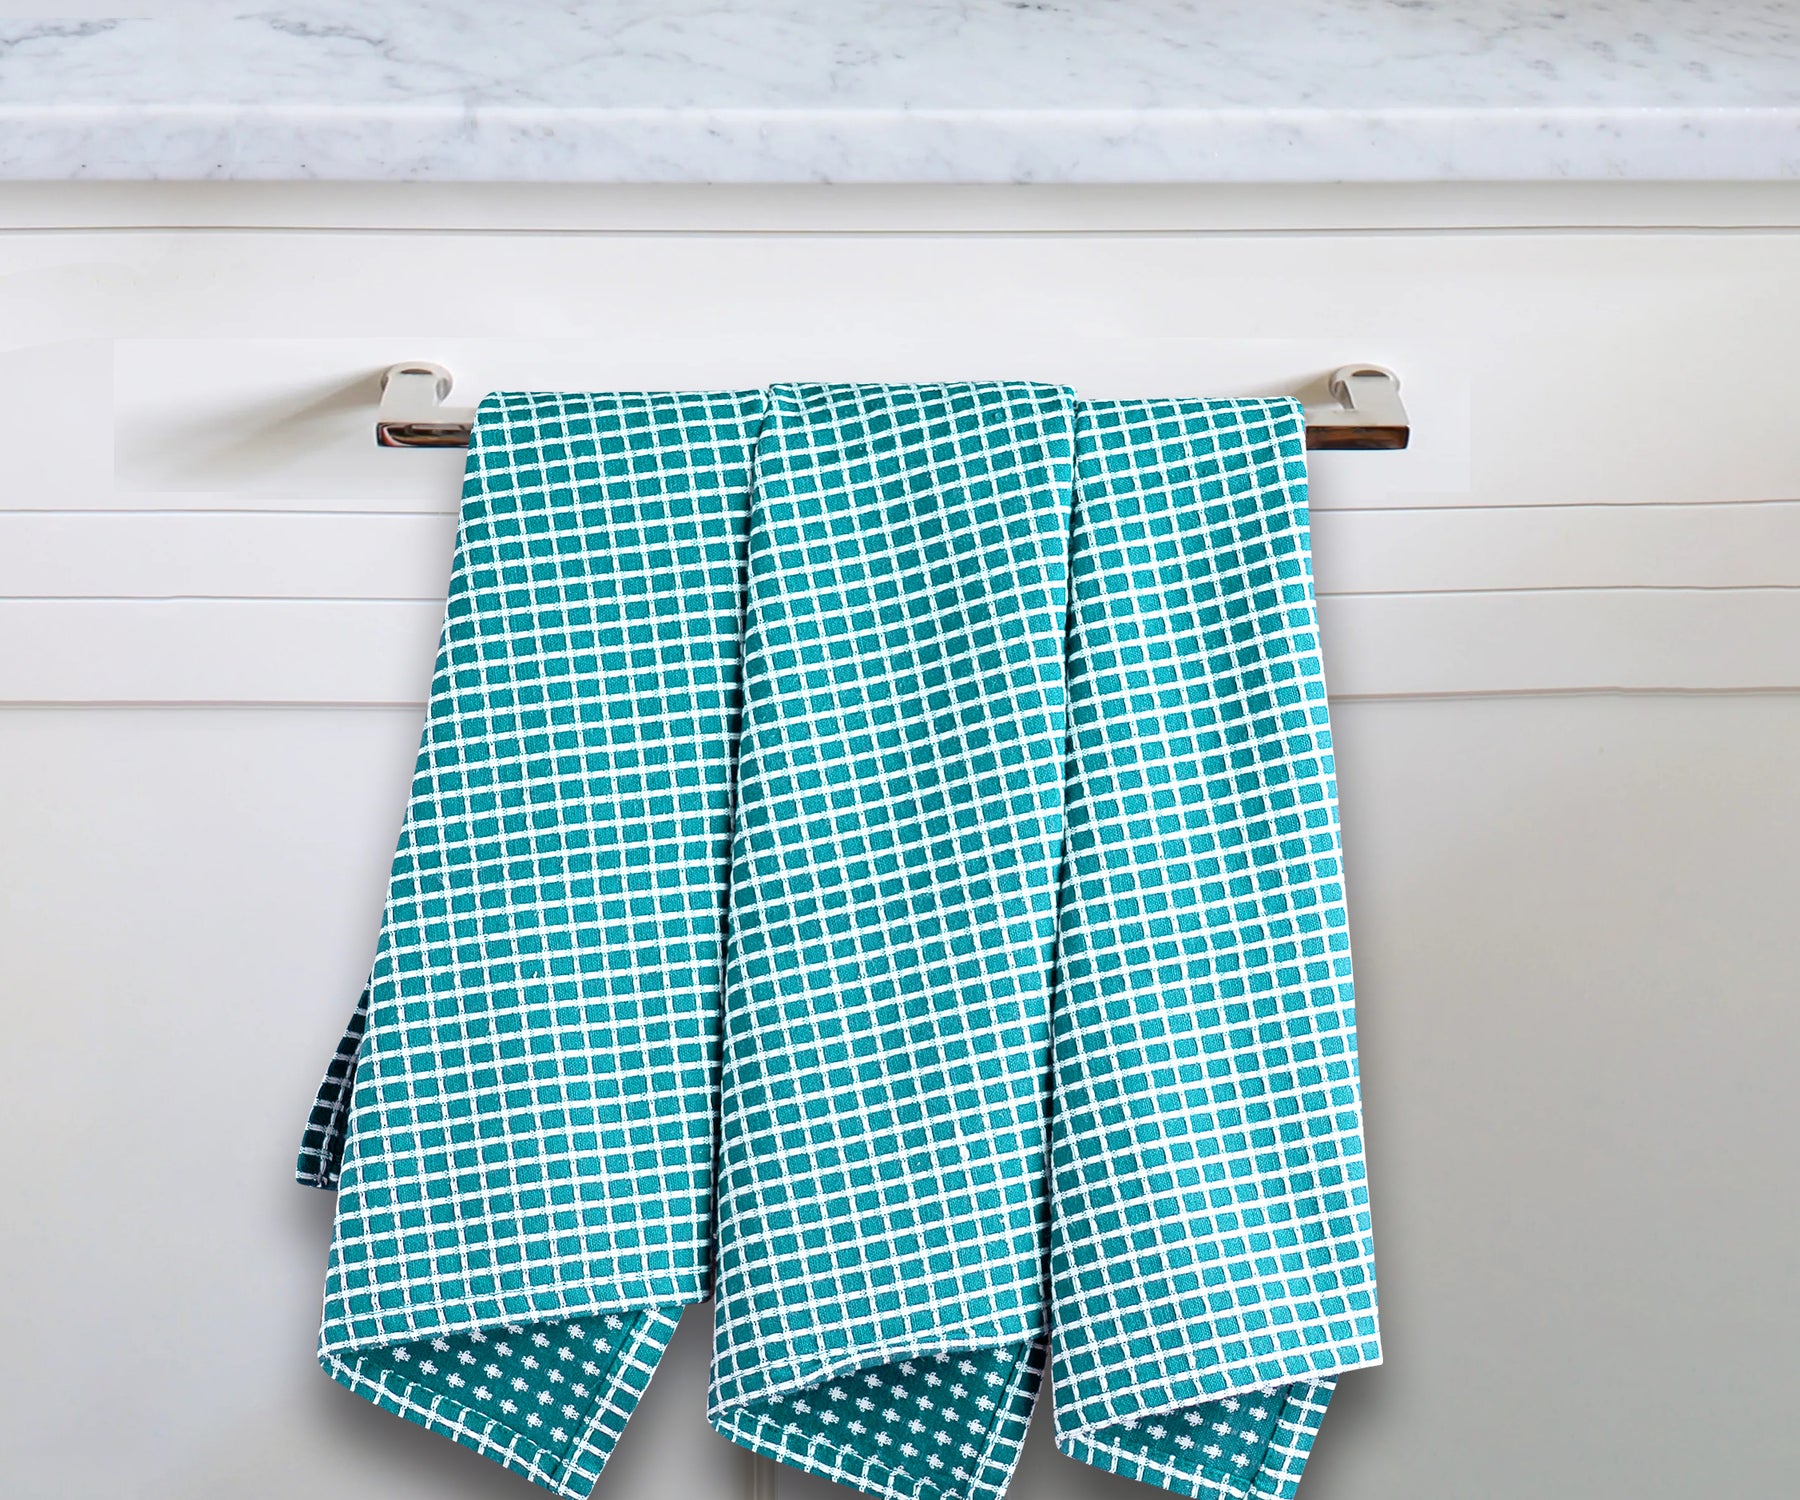 washable dish towels for kitchen, teal and white pattern kitchen towels, cloth dish towels for decoration